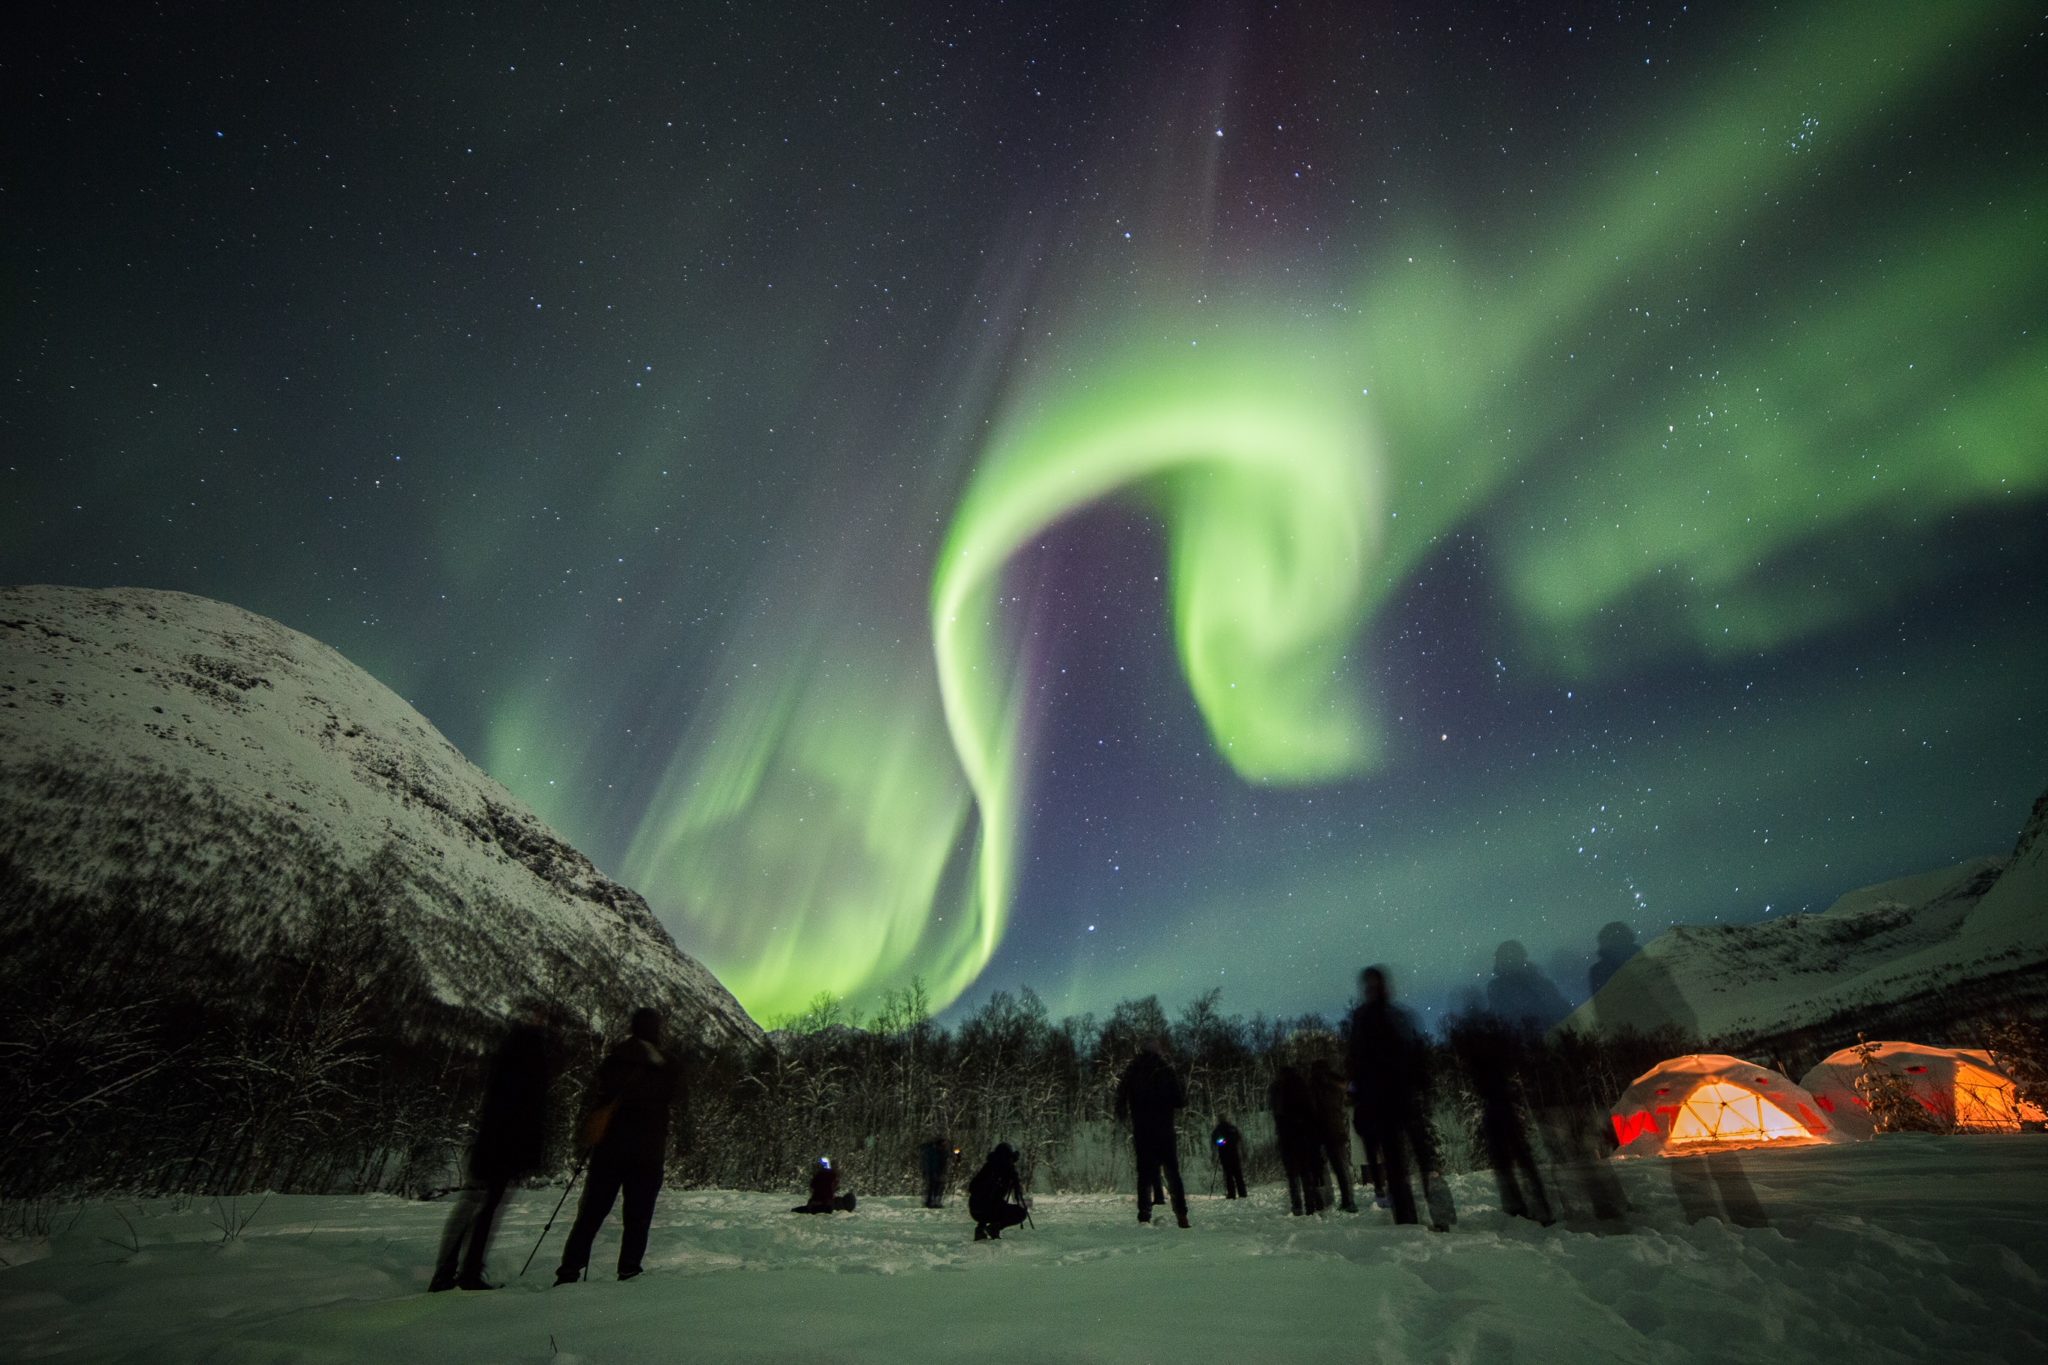 Strong aurora over excited guests © William Copeland